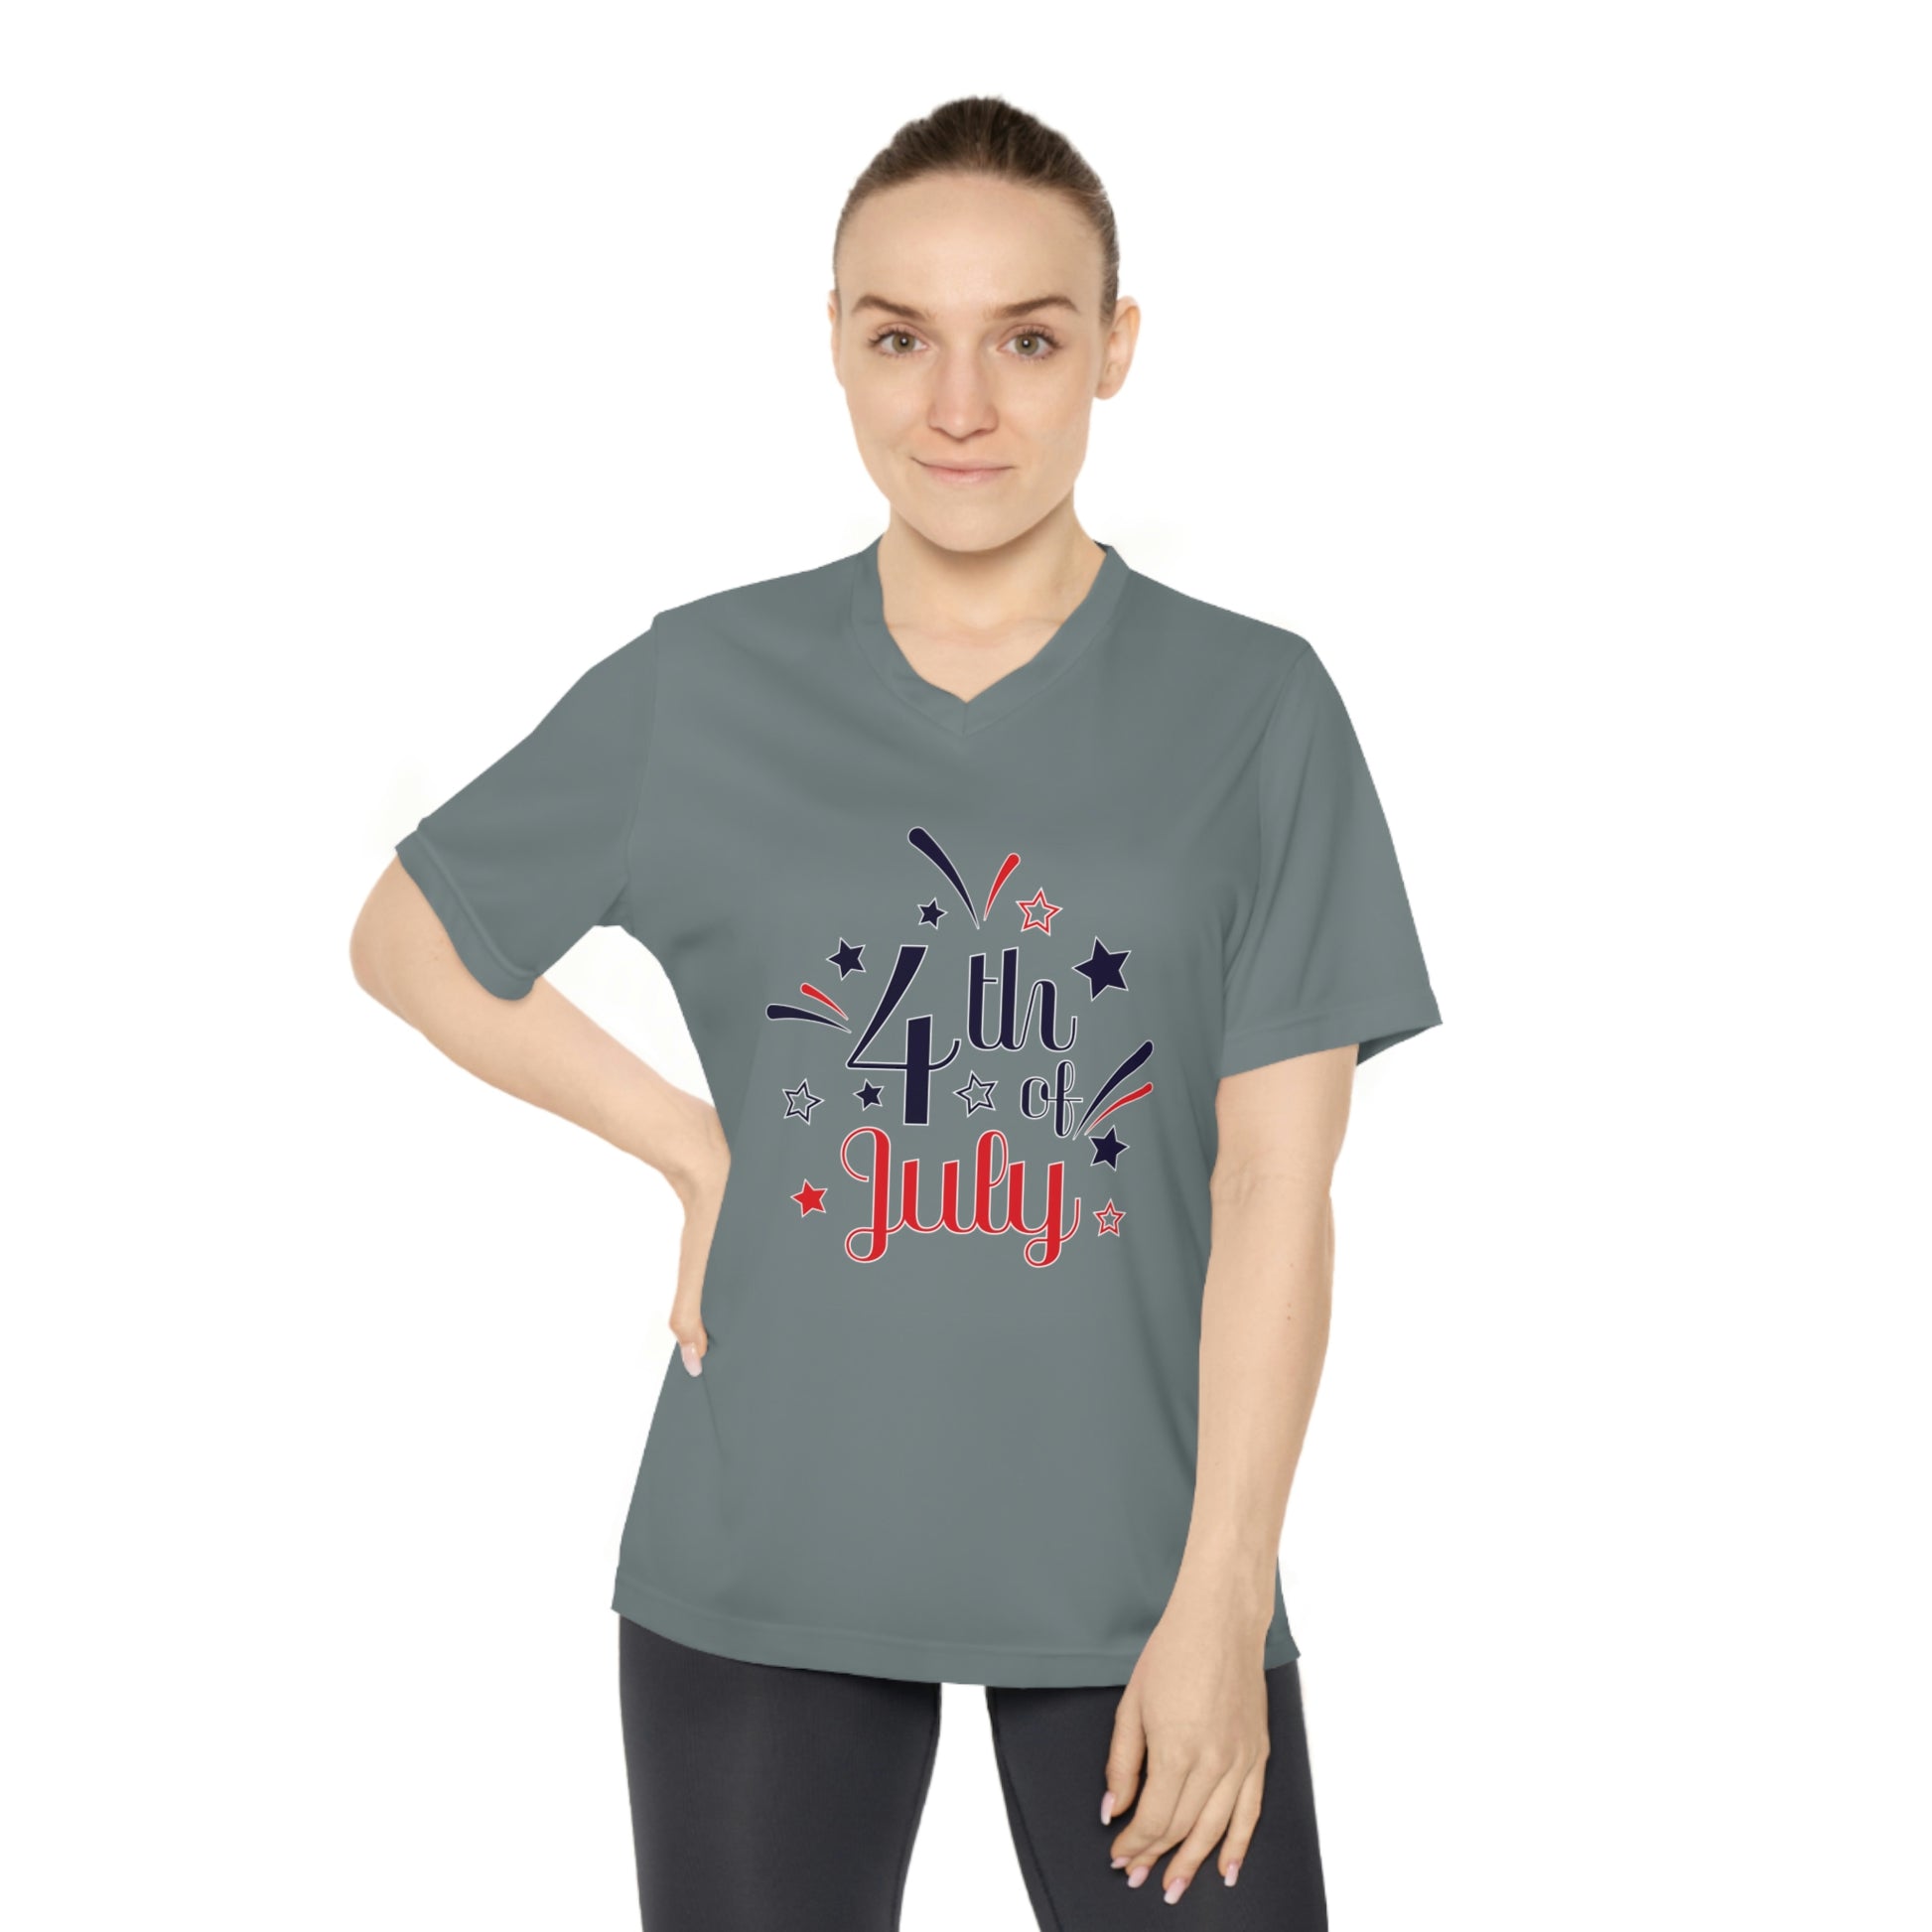 Mock up of a woman wearing the grey t-shirt